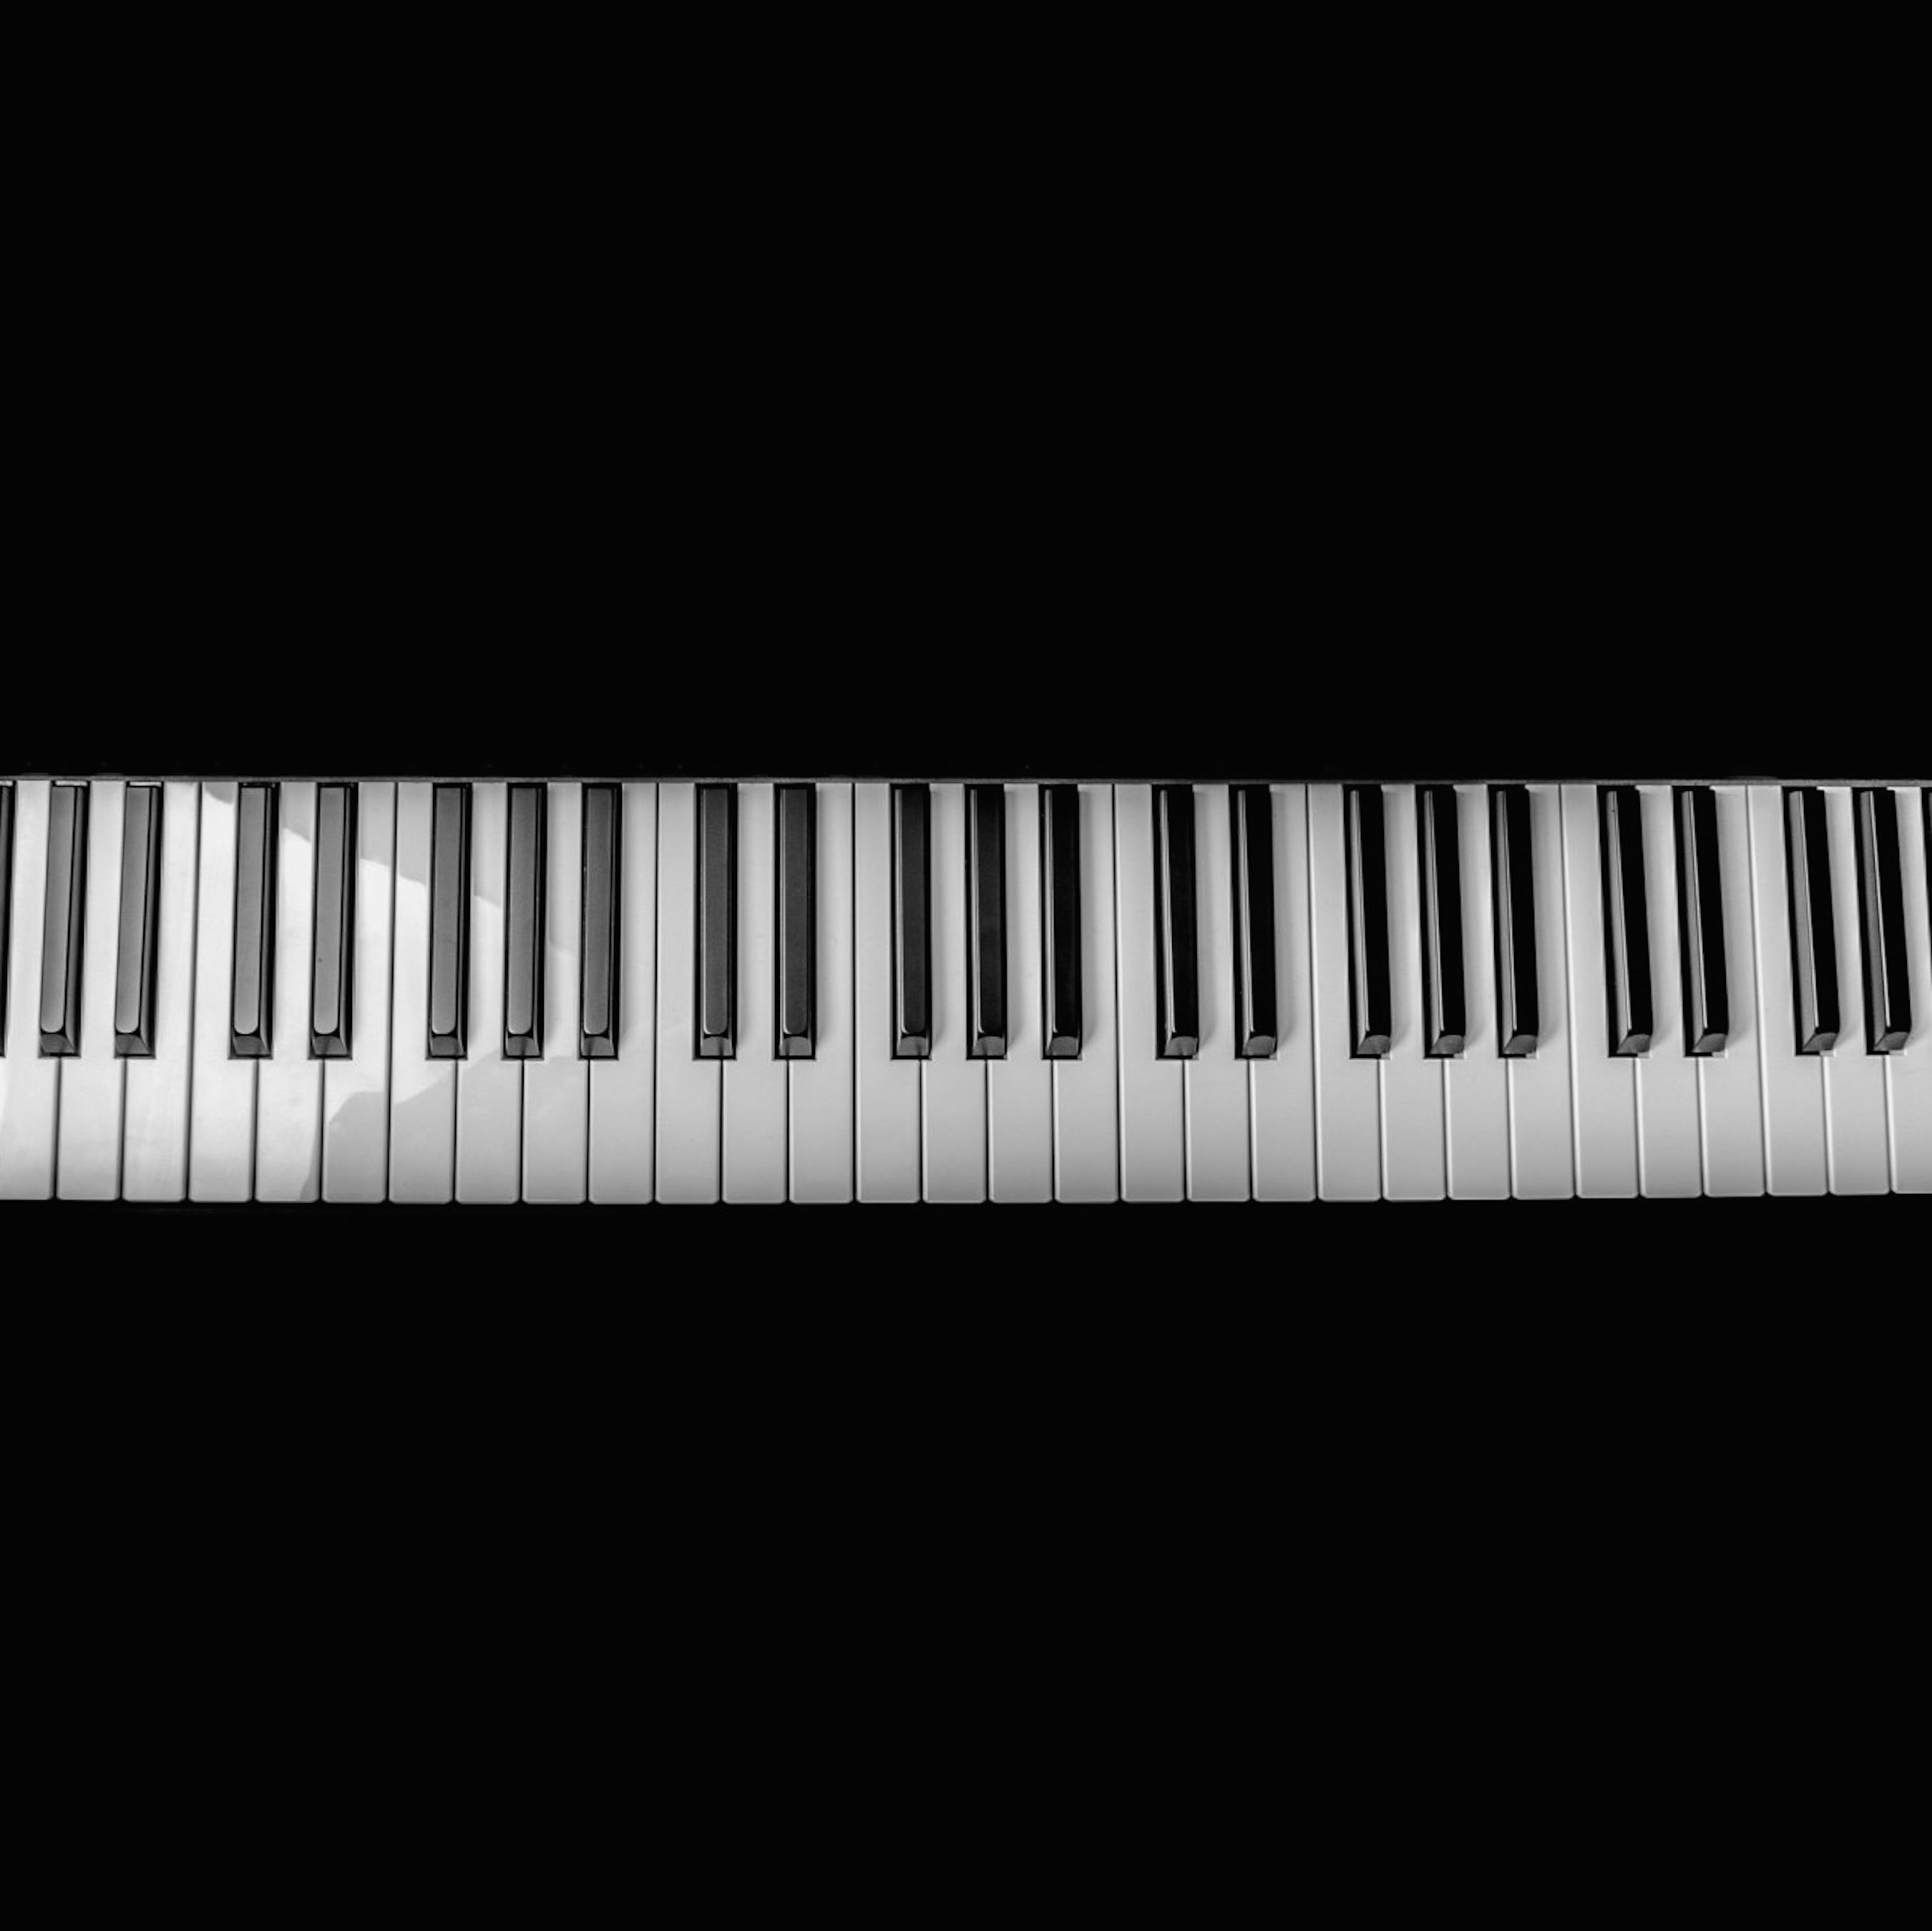 20 Essential Piano Songs - Loving and Romantic Piano Pieces for an Intimate Mood and Powerful Focus